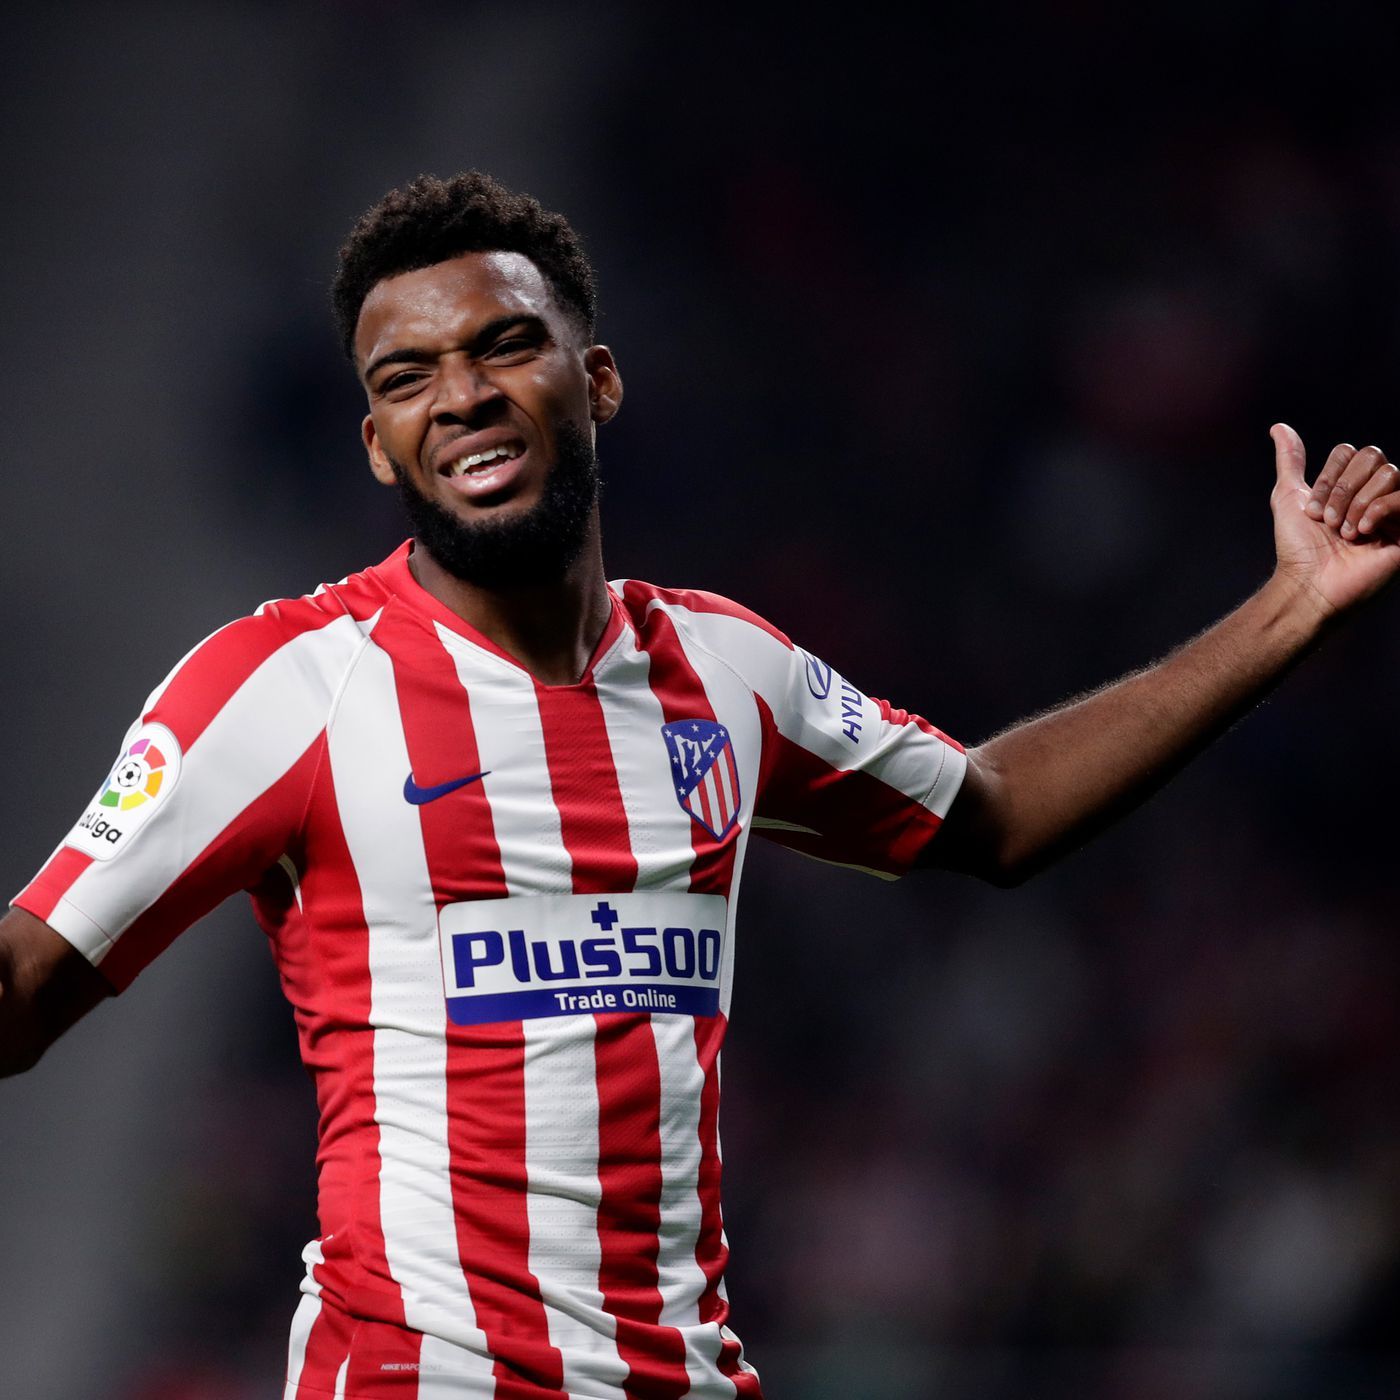 Thomas Lemar has not adjusted to Atlético